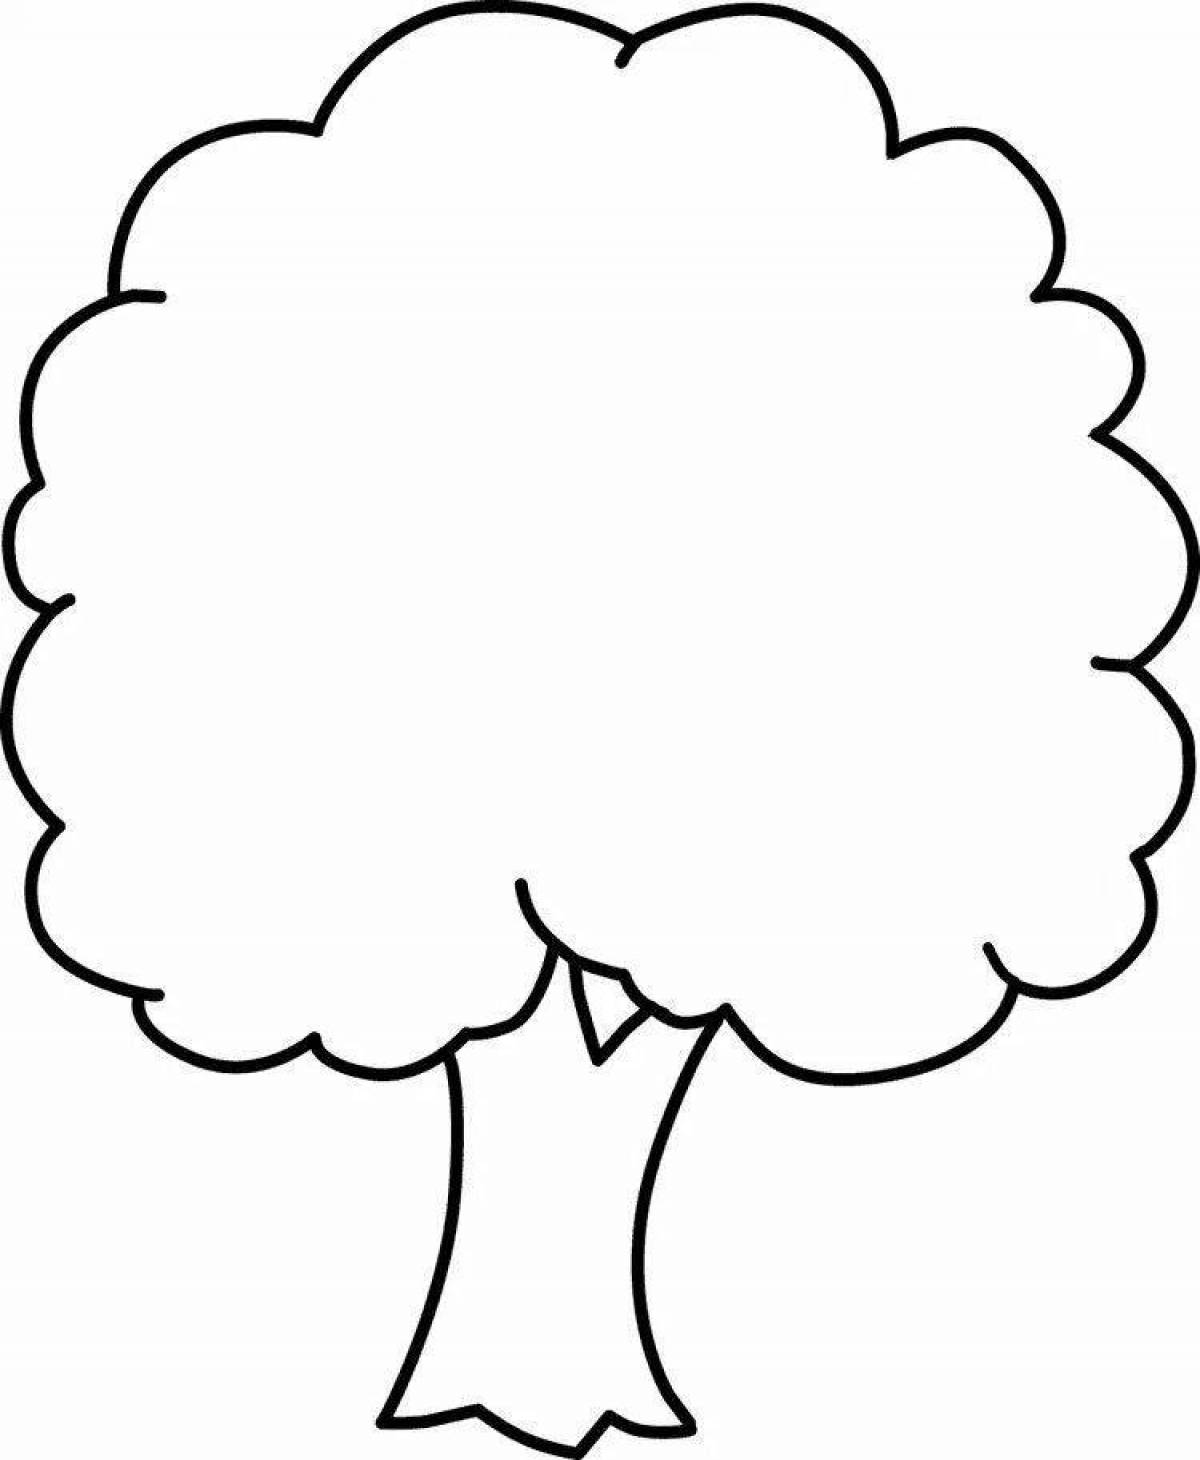 Exquisite pattern tree coloring page